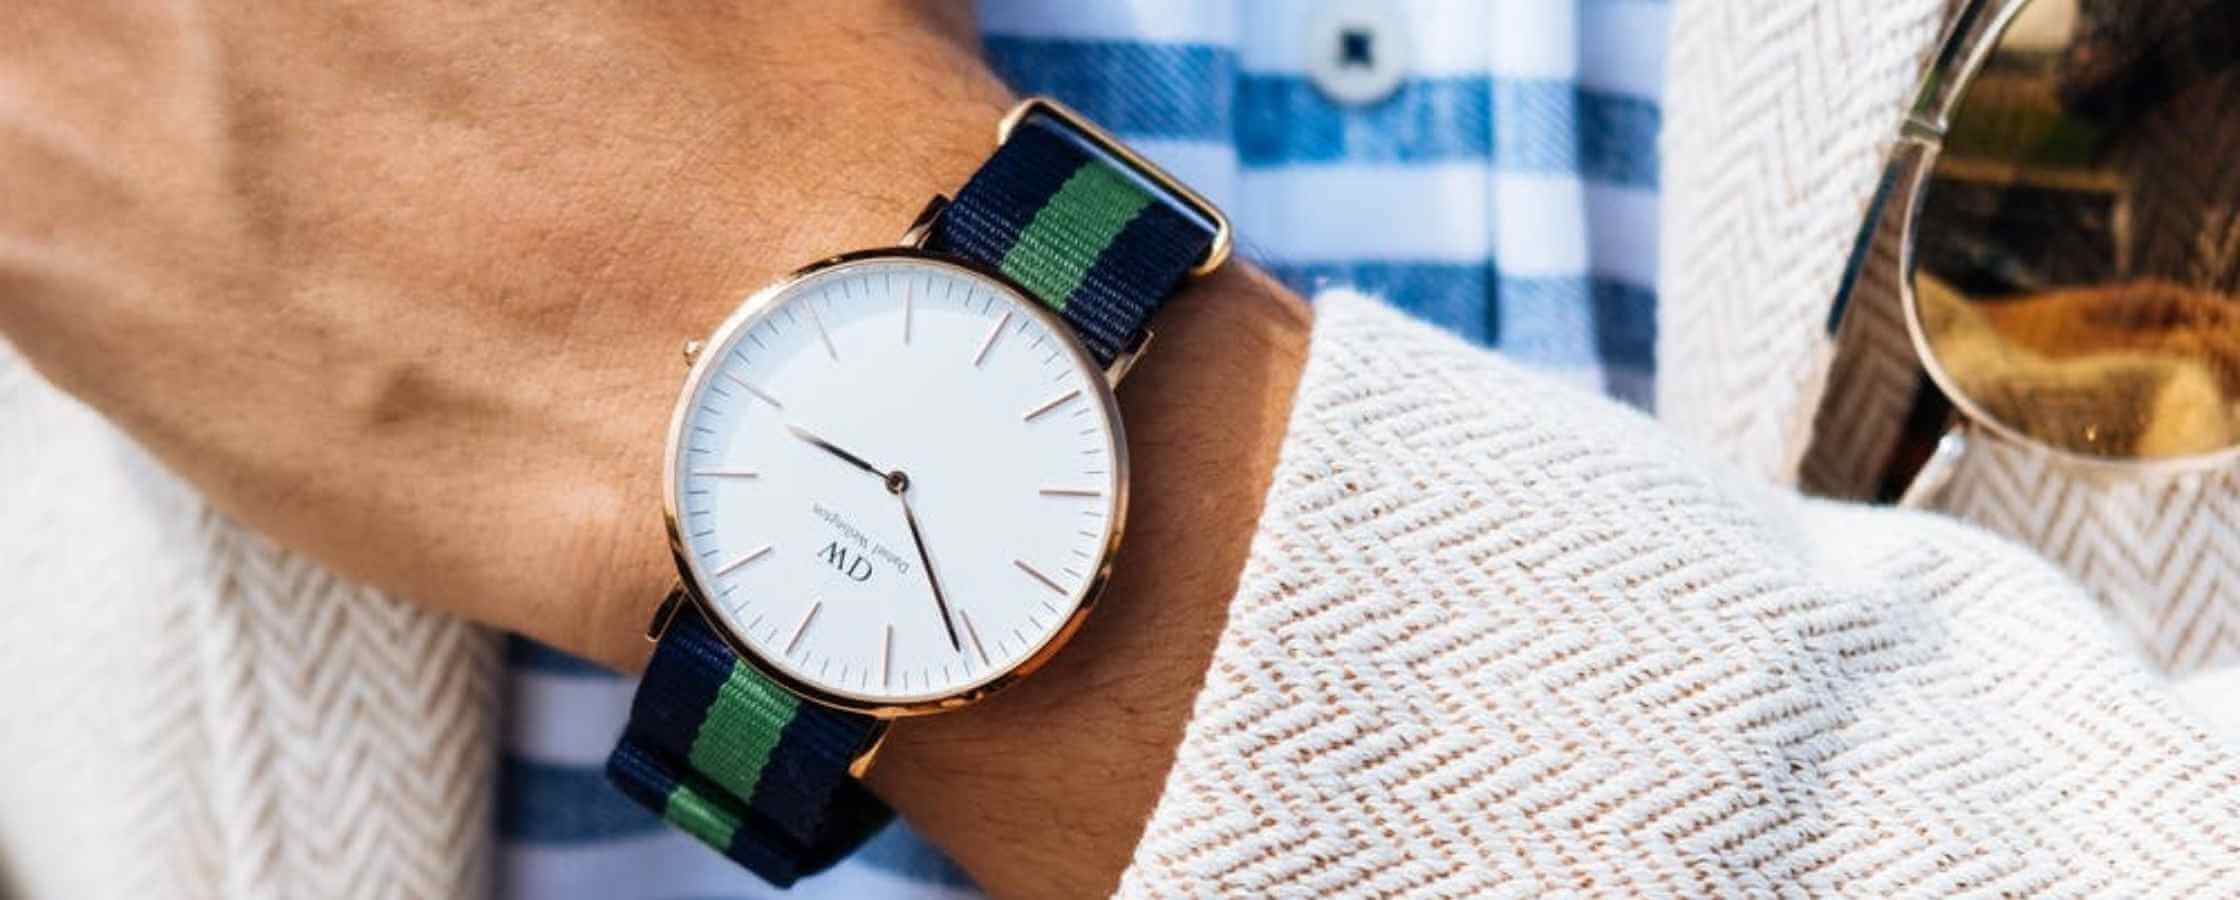 How to Wear a Watch Without Worry (Ultimate Guide for Men)